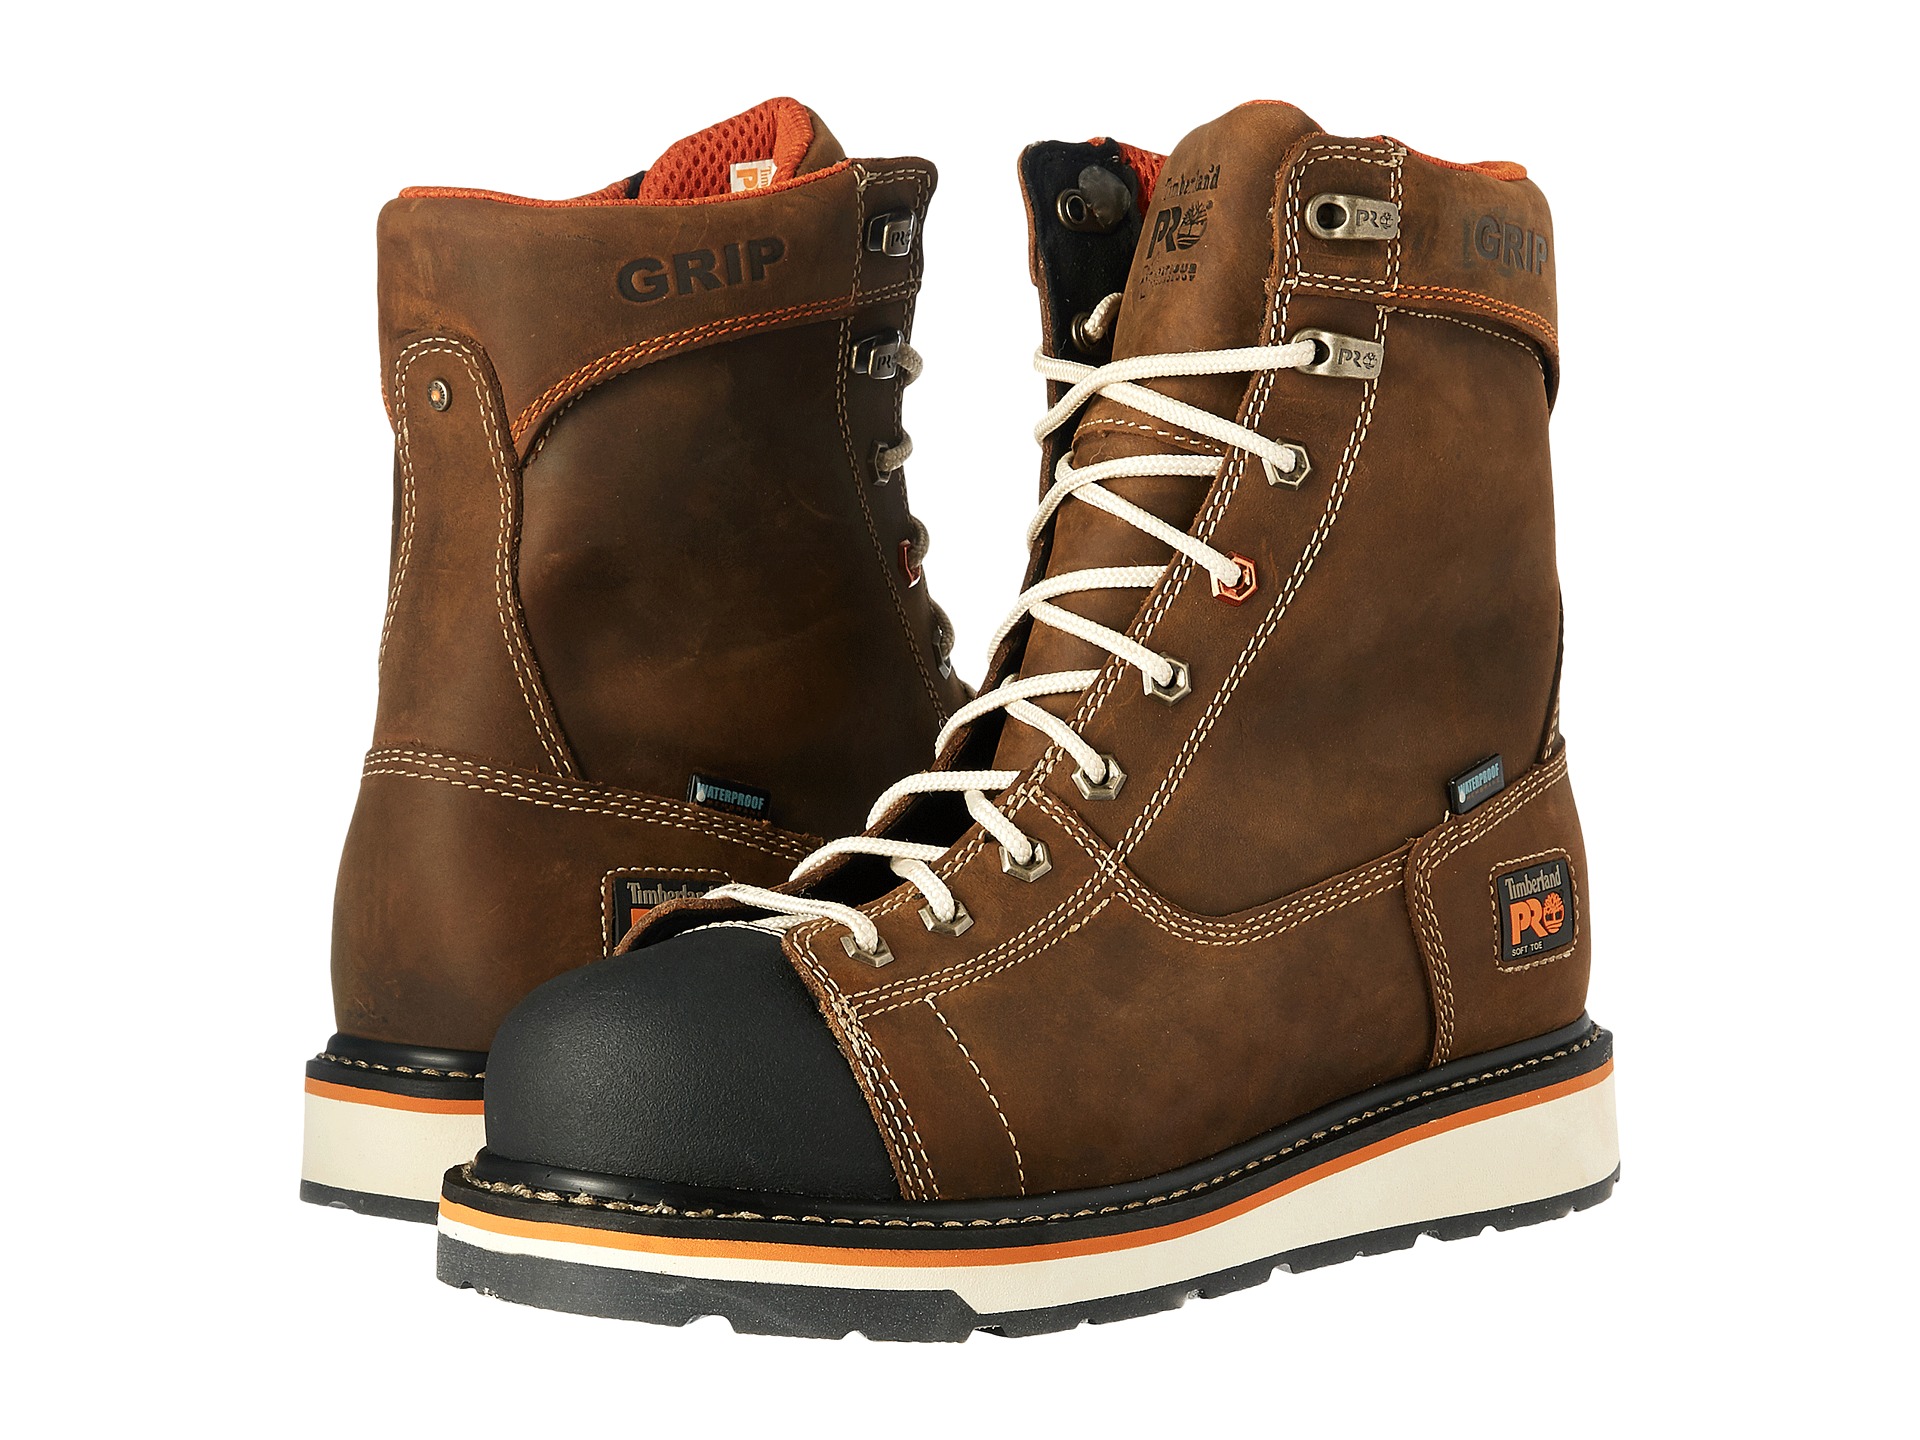 Timberland PRO Gridworks Soft Toe Waterproof Boot at Zappos.com